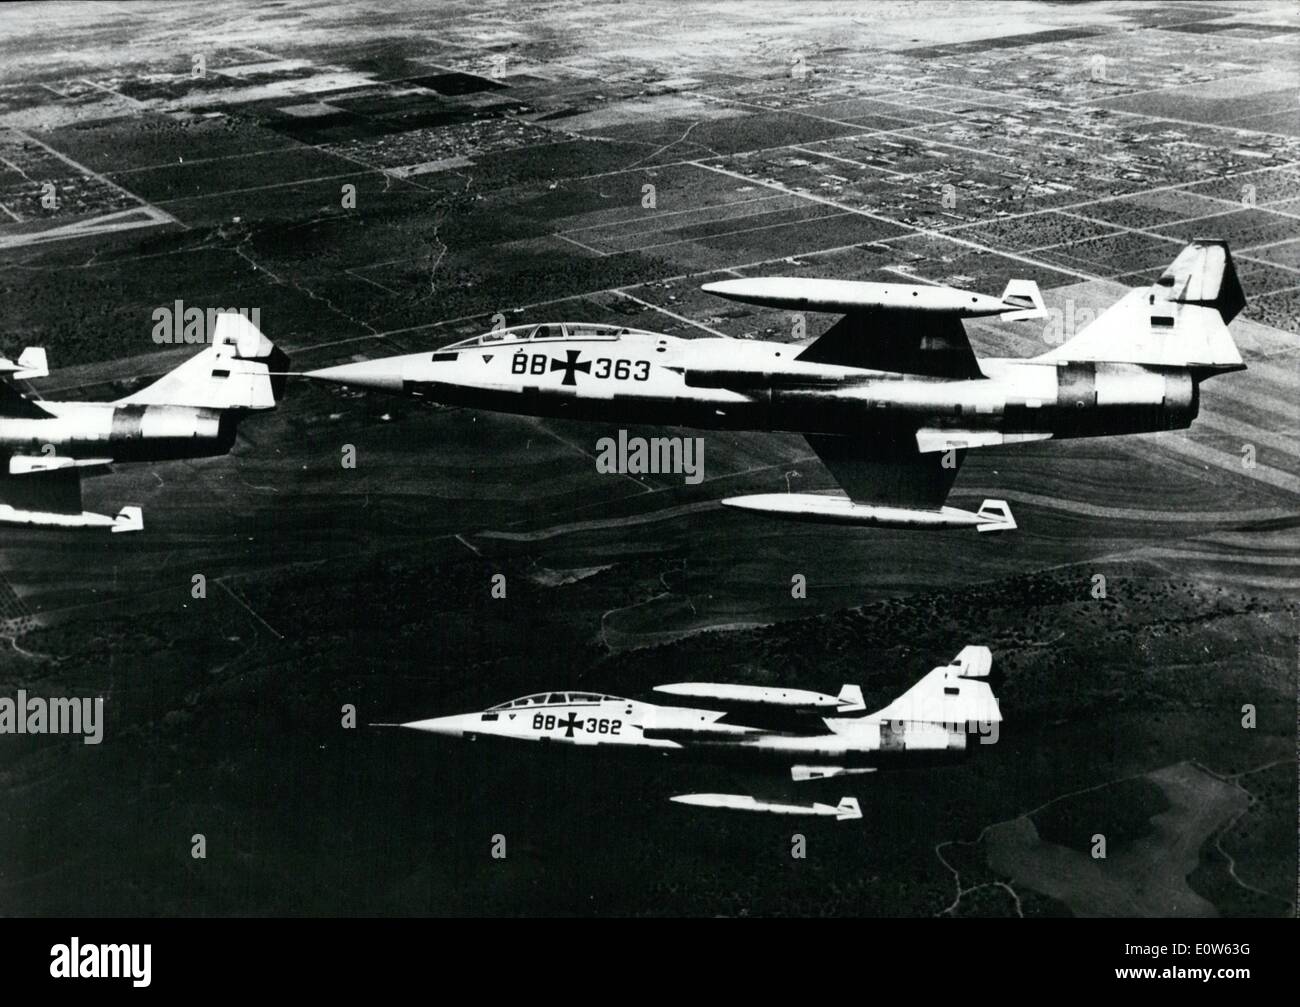 Sep. 09, 1961 - 5th anniversary of ''New German Air Force'' The German Air Force (Luftwaffe) hold on Sept. 24th an air show on the airfiele Furstenfeldbruck near Munich. The show will be opened by German and foreign artistic air squads. Our picture shows German starfighters F 104 which will take part in the air show. Stock Photo